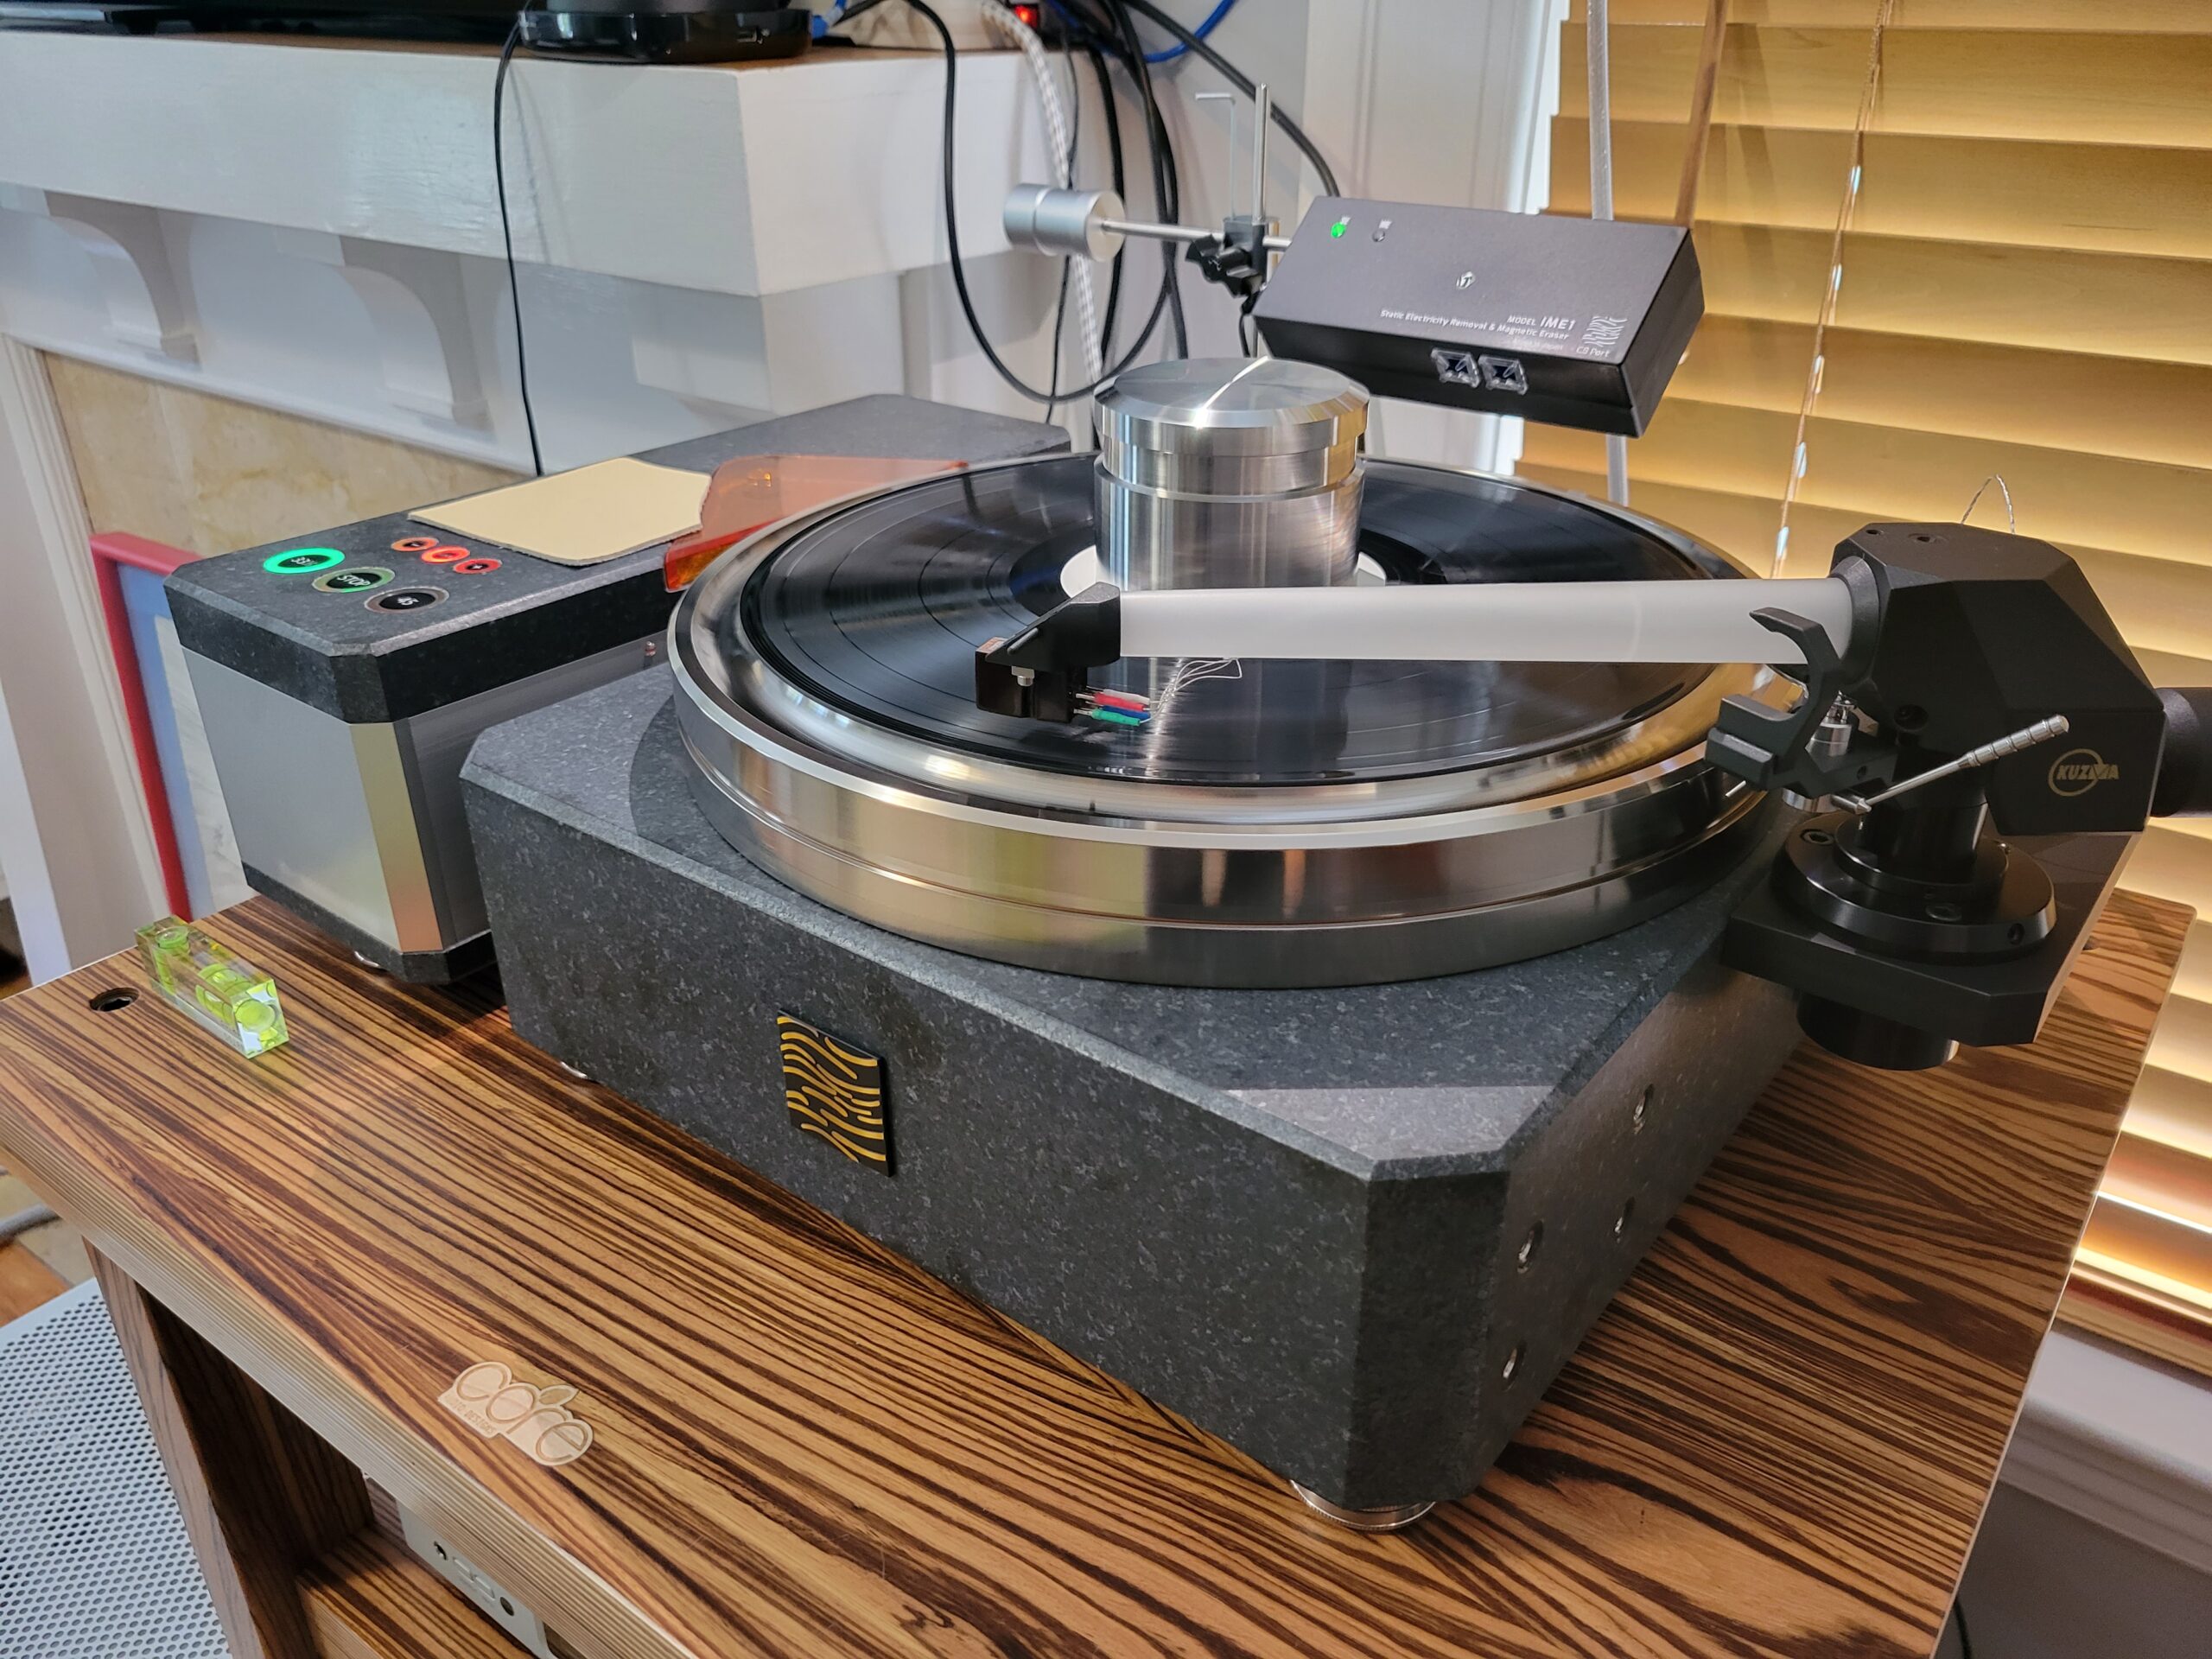 SOS completed this past weekend the installation of another stunning CS Port TAT1M2 table with Kuzma Safir tonearm…..beautiful sound heard :-)